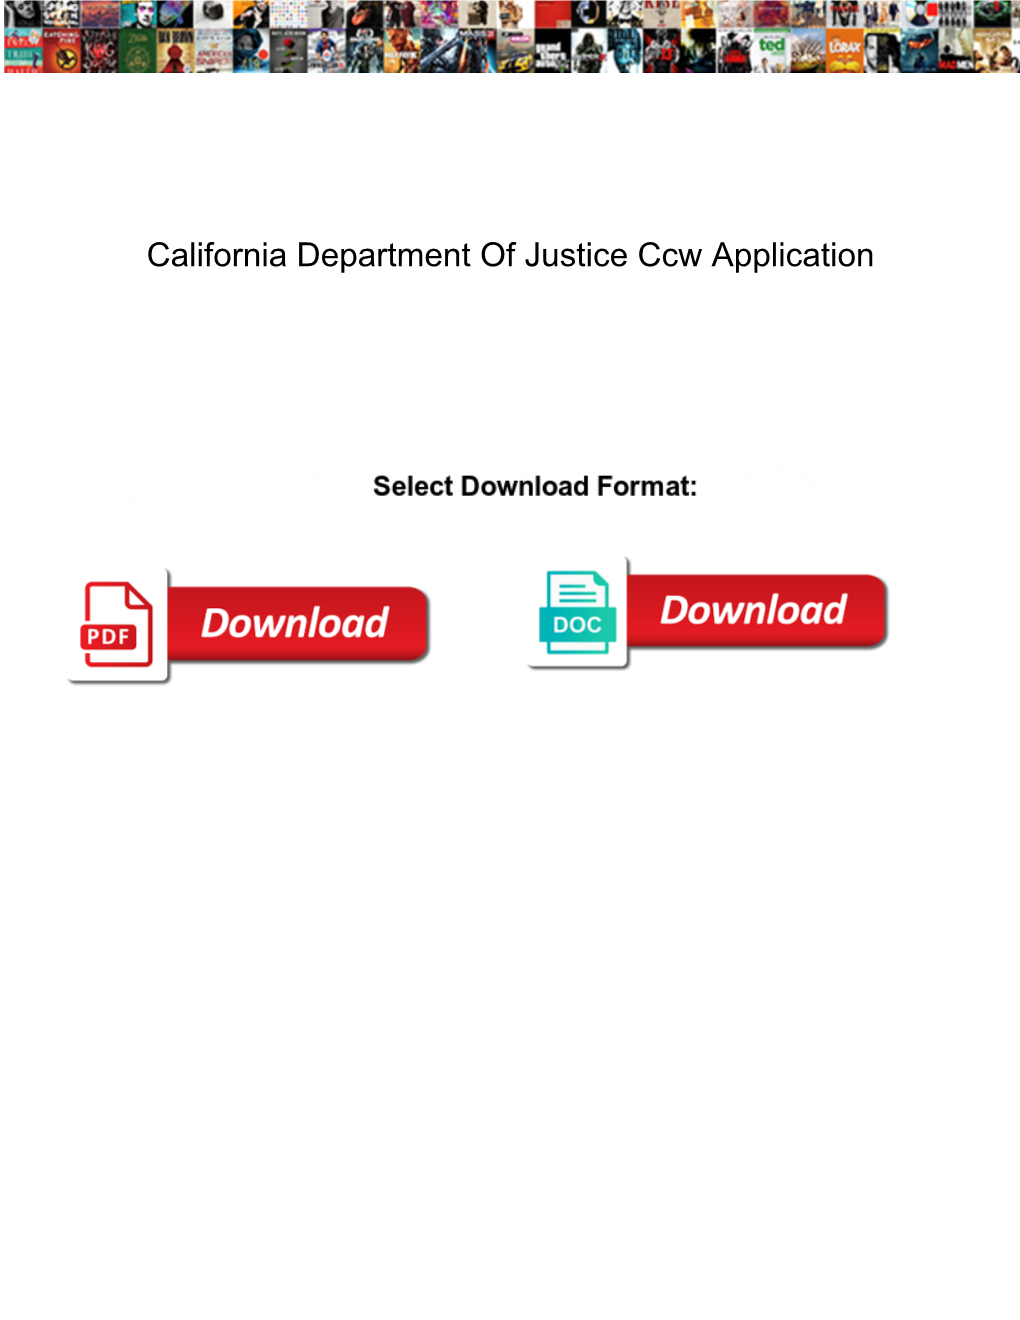 California Department of Justice Ccw Application